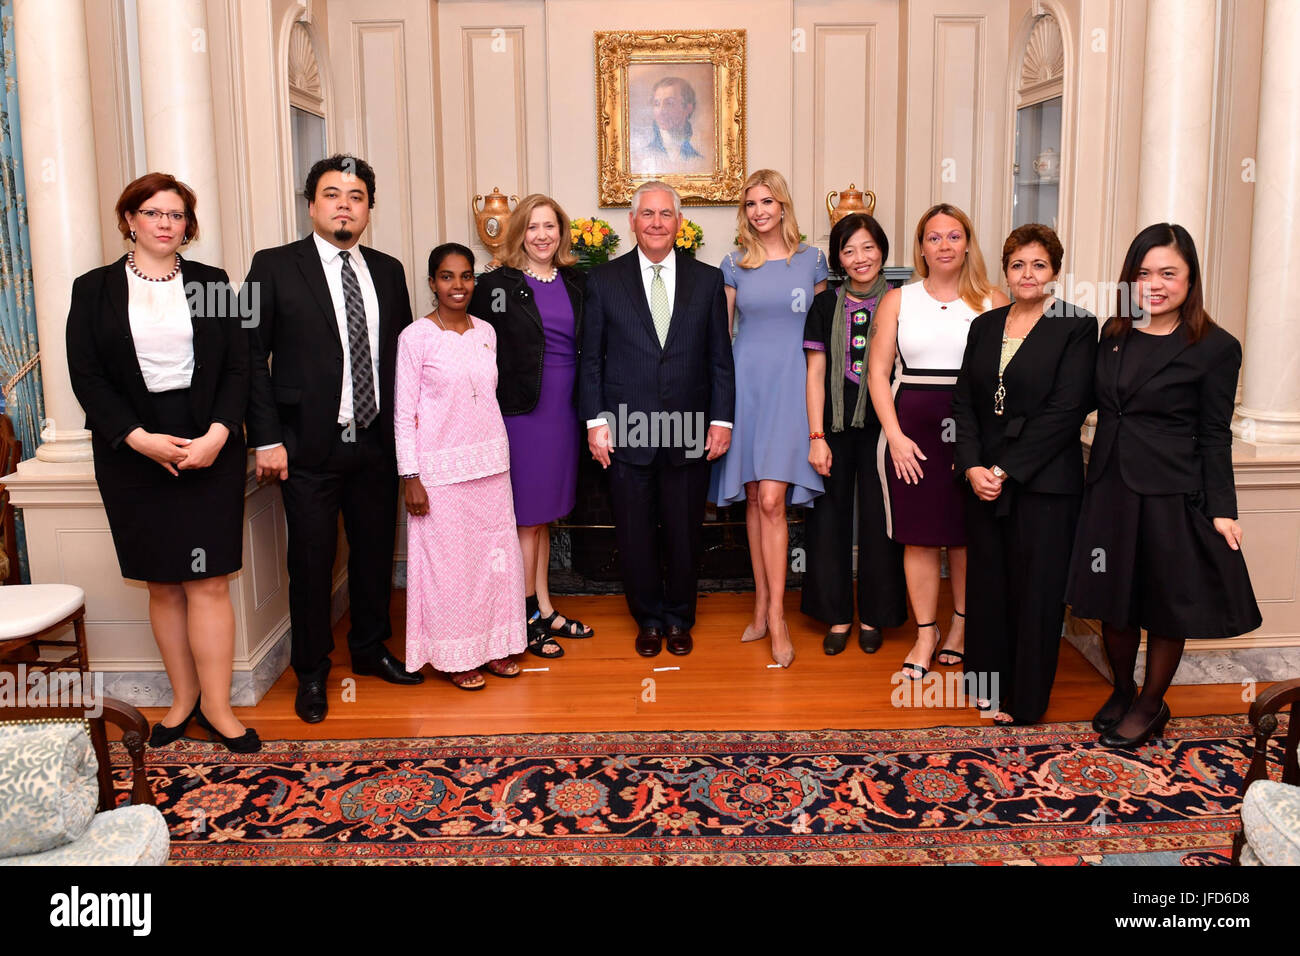 U.S. Secretary of State Rex Tillerson, Advisor to the President Ivanka Trump and Ambassador-at-Large to Monitor and Combat Trafficking in Persons and Senior Advisor to the Secretary of State Susan Coppedge pose for a photo with the 2017 Trafficking in Persons Heroes at the U.S. Department of State in Washington, D.C., on June 27, 2017. The 2017 TIP Heroes are Alika Kinan of #Argentina, Leonardo Sakamoto of #Brazil, Vanaja Jasphine of #Cameroon, Viktoria Sebhelyi of #Hungary, Mahesh Muralidhar Bhagwat of #India, Amina Oufroukhi of #Morocco, Allison Lee of #Taiwan, and Boom Mosby of #Thailand. Stock Photo